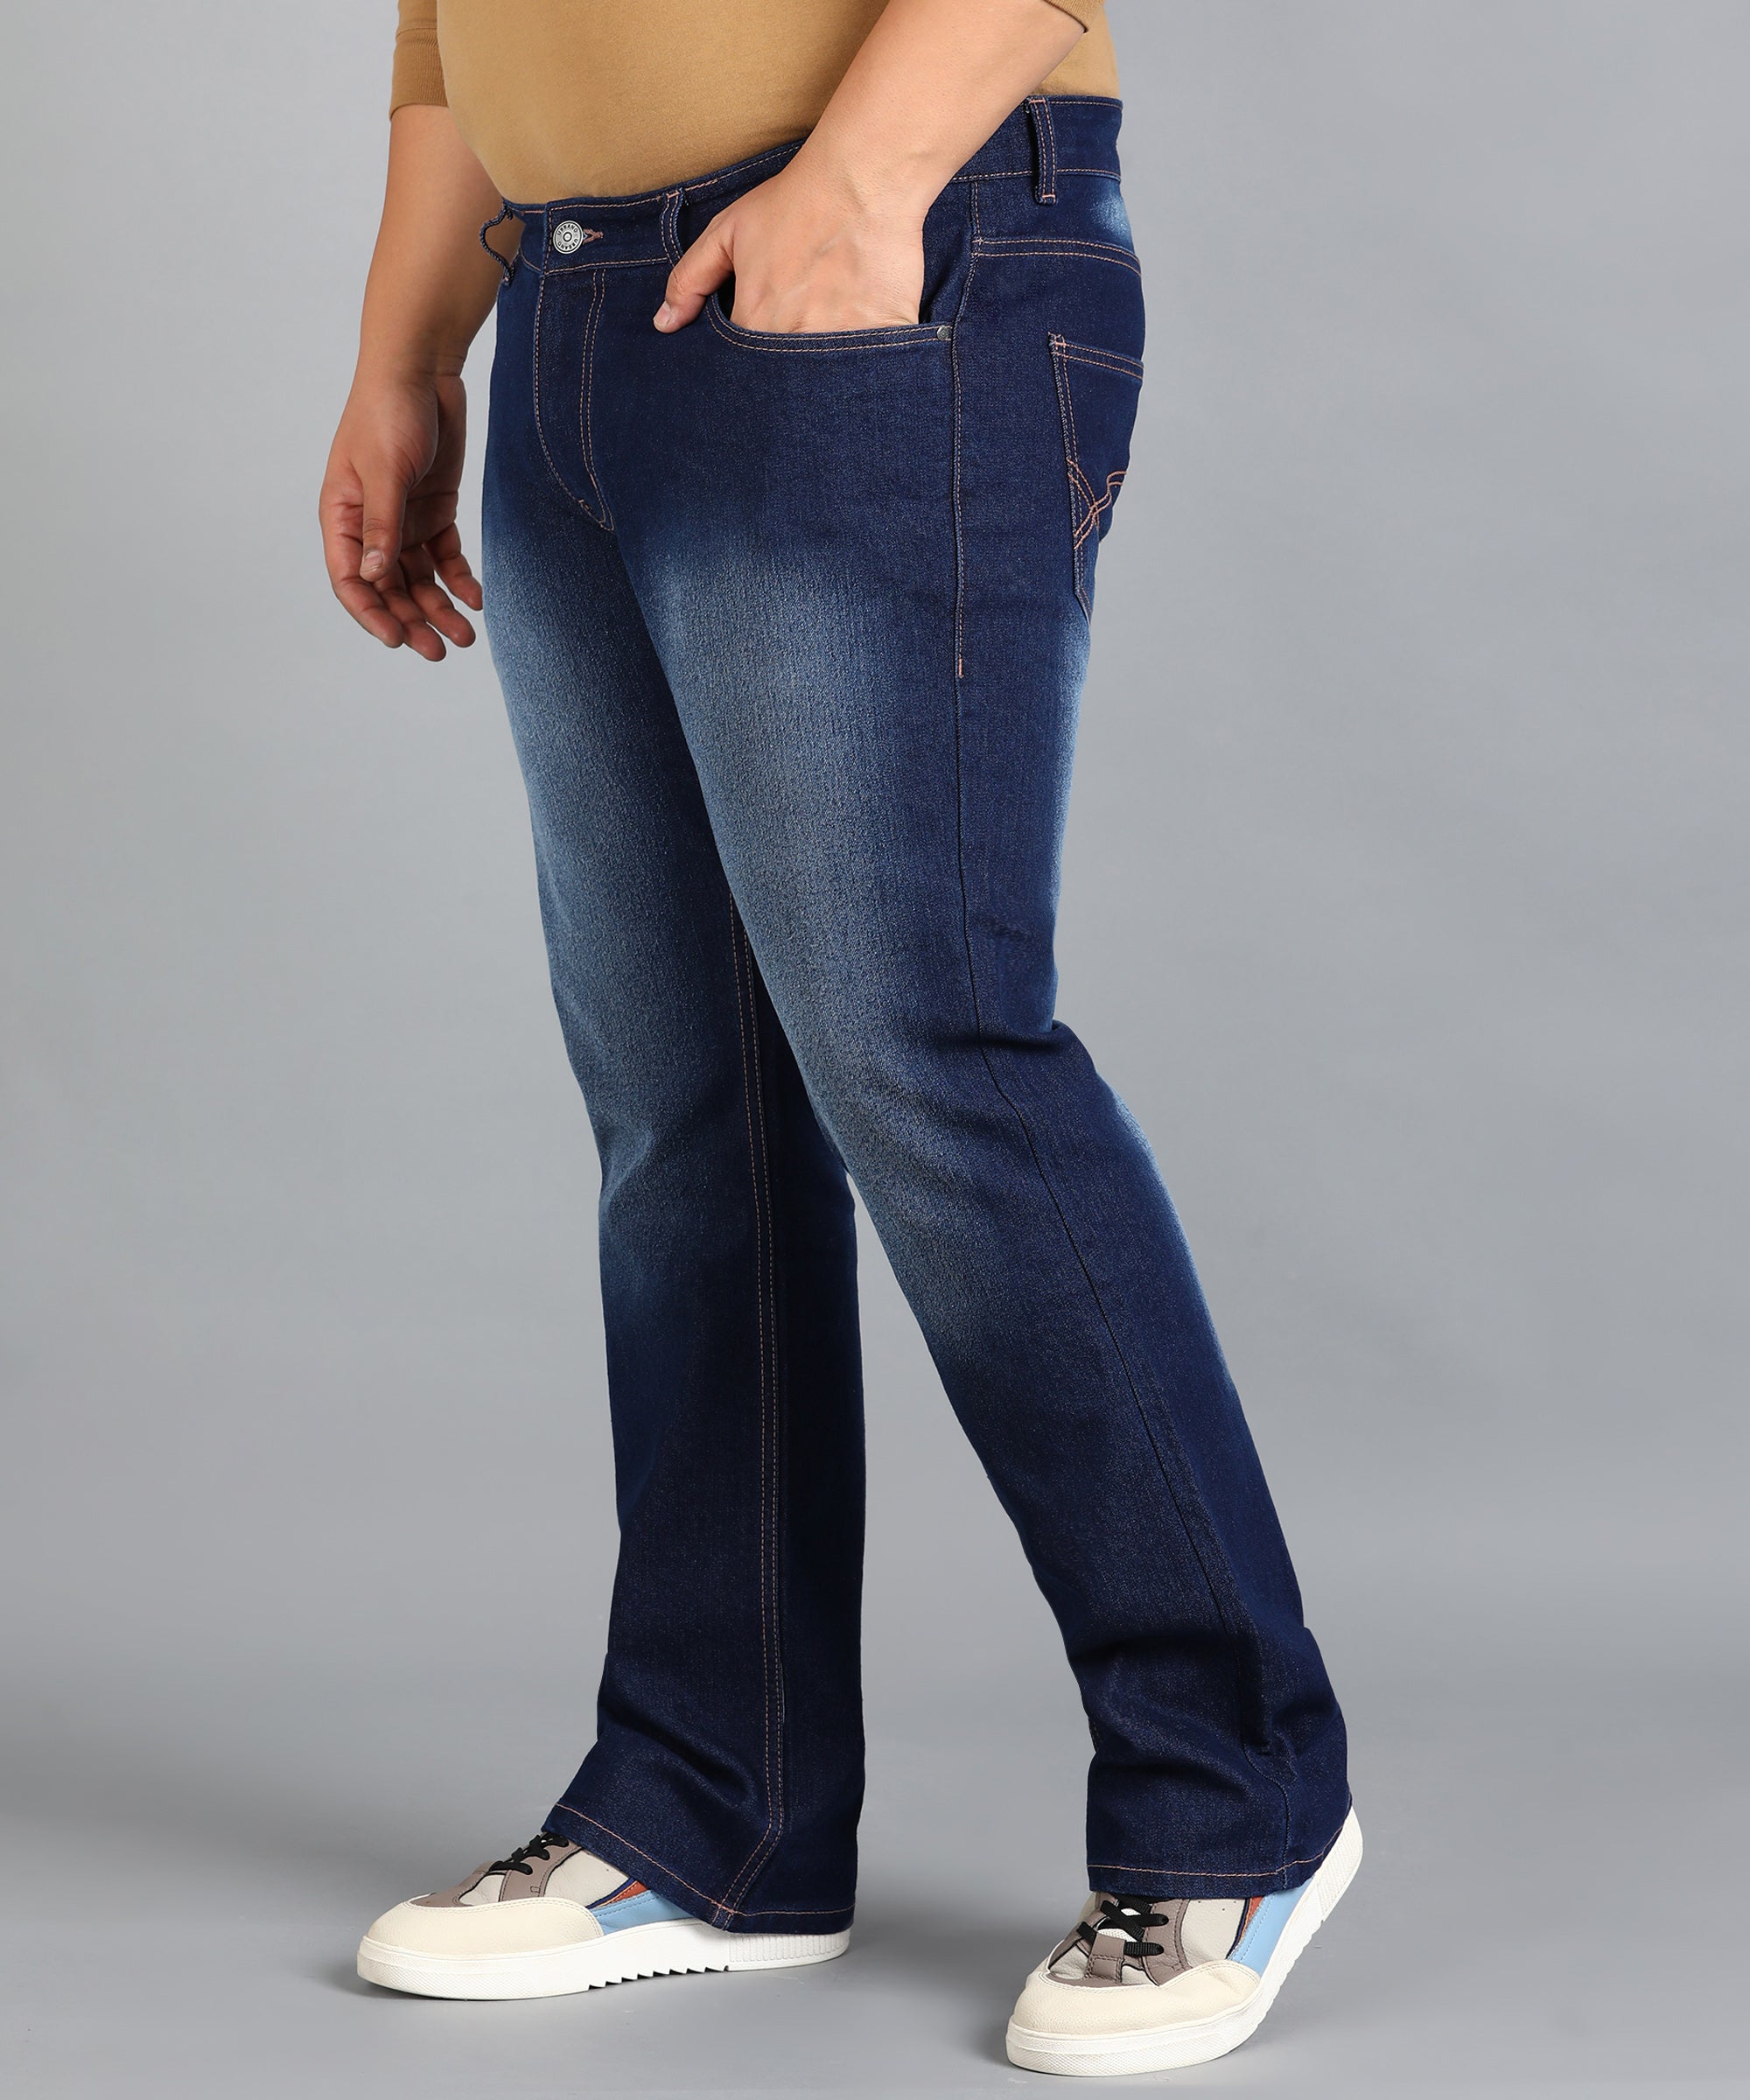 Plus Men's Dark Blue Washed Bootcut Jeans Stretchable